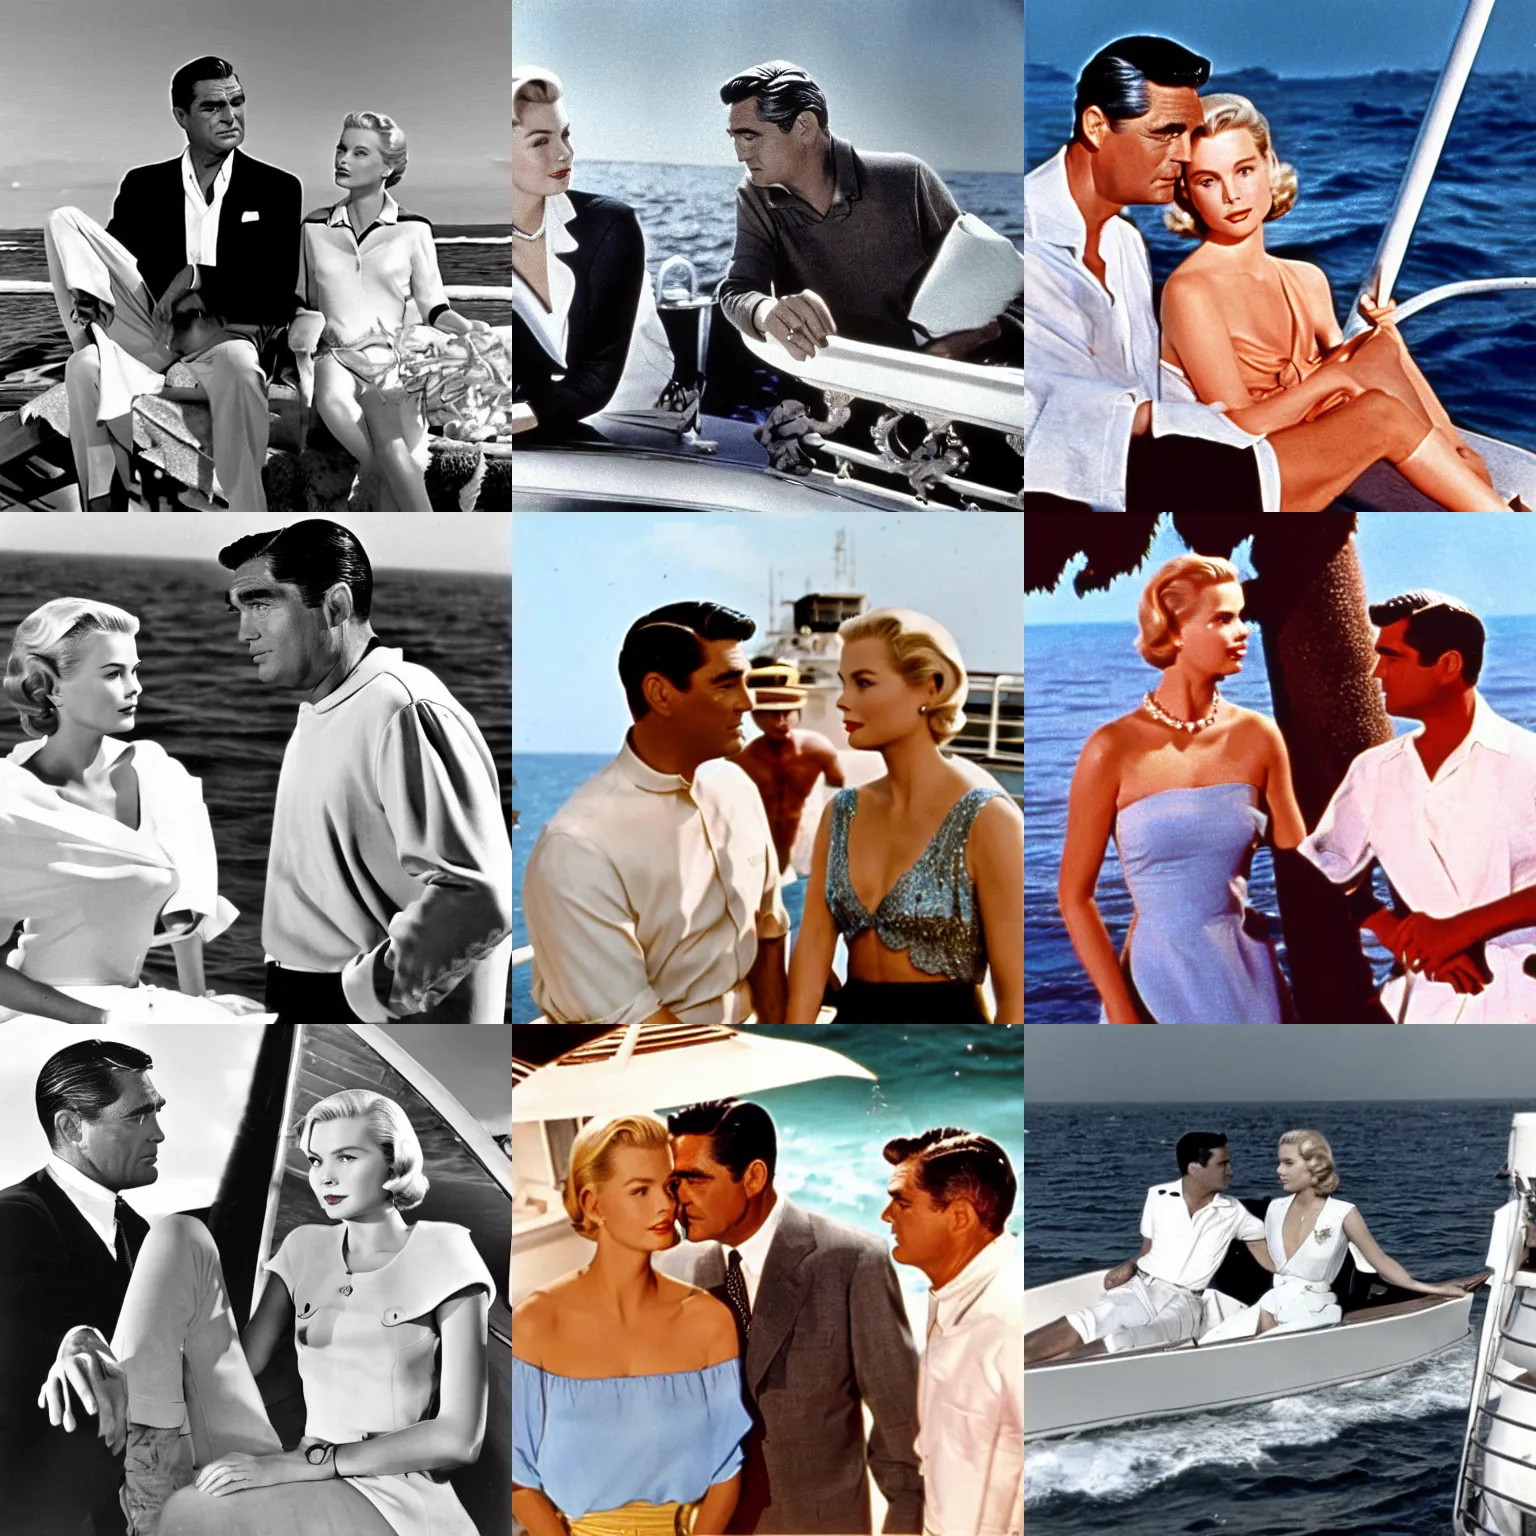 Prompt: scene on the sea from to catch a thief with grace kelly and cary grant